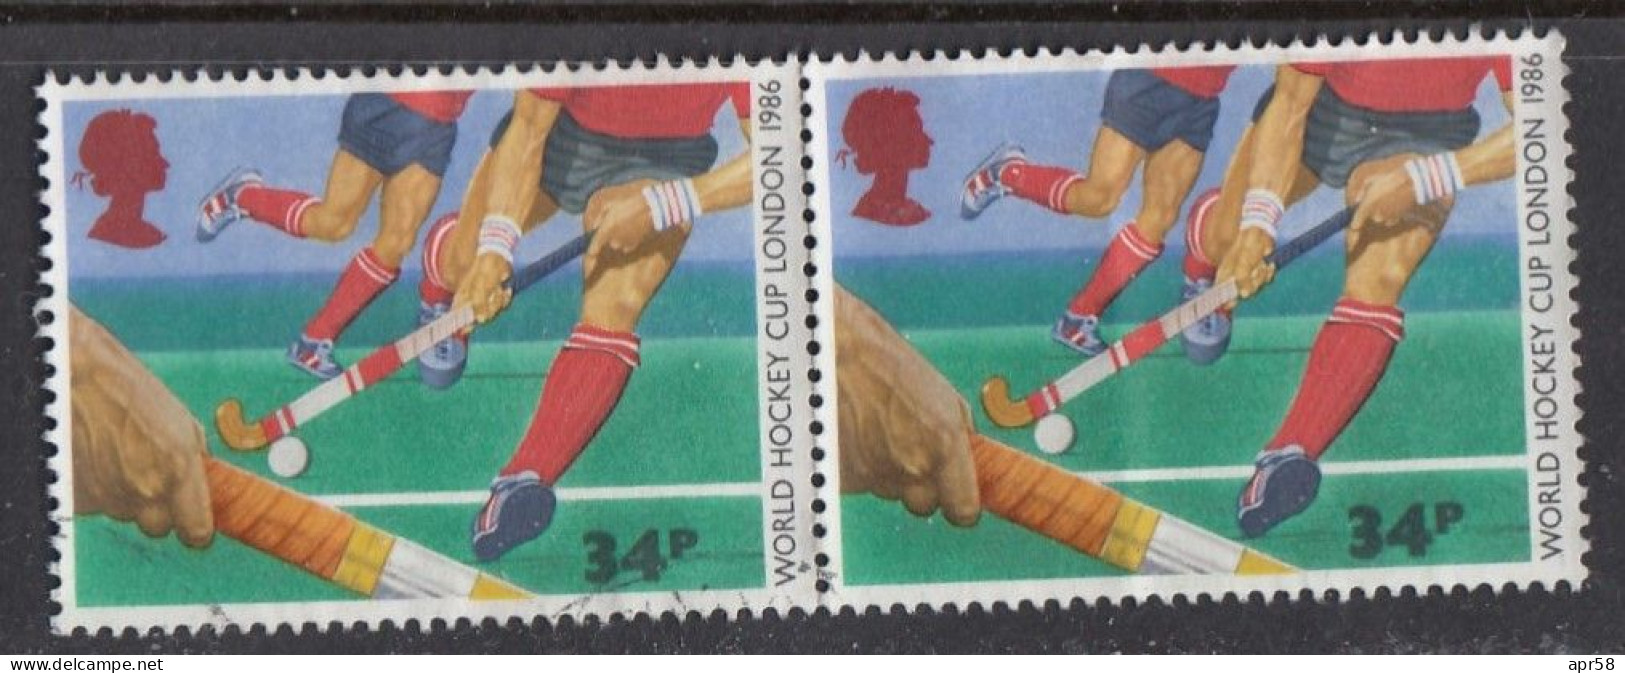 1989 Sg 1332 - Used Stamps